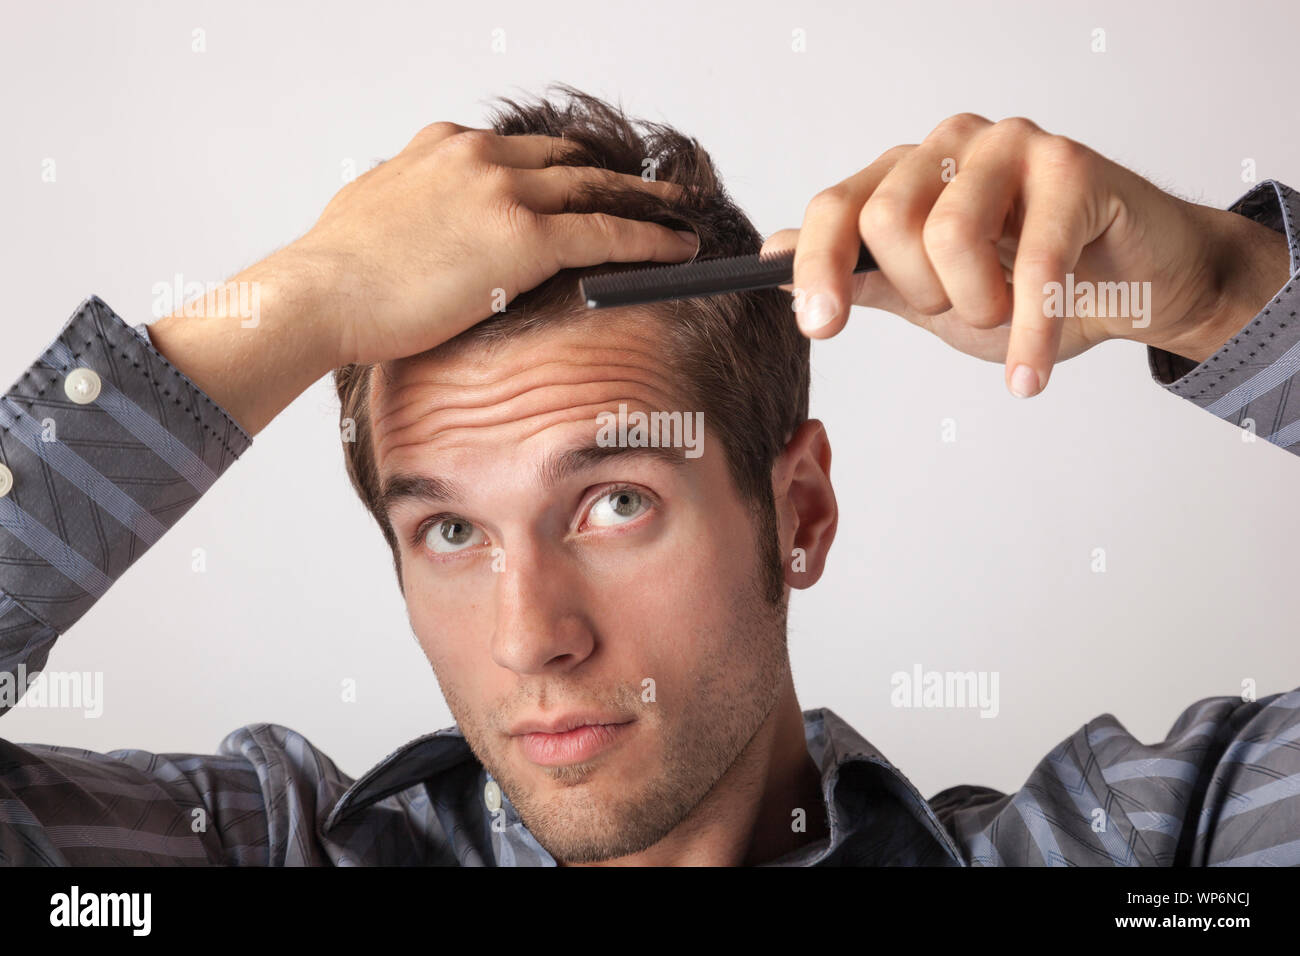 Young man combing his hair. Men's hairstyles grooming and personal care. Stock Photo